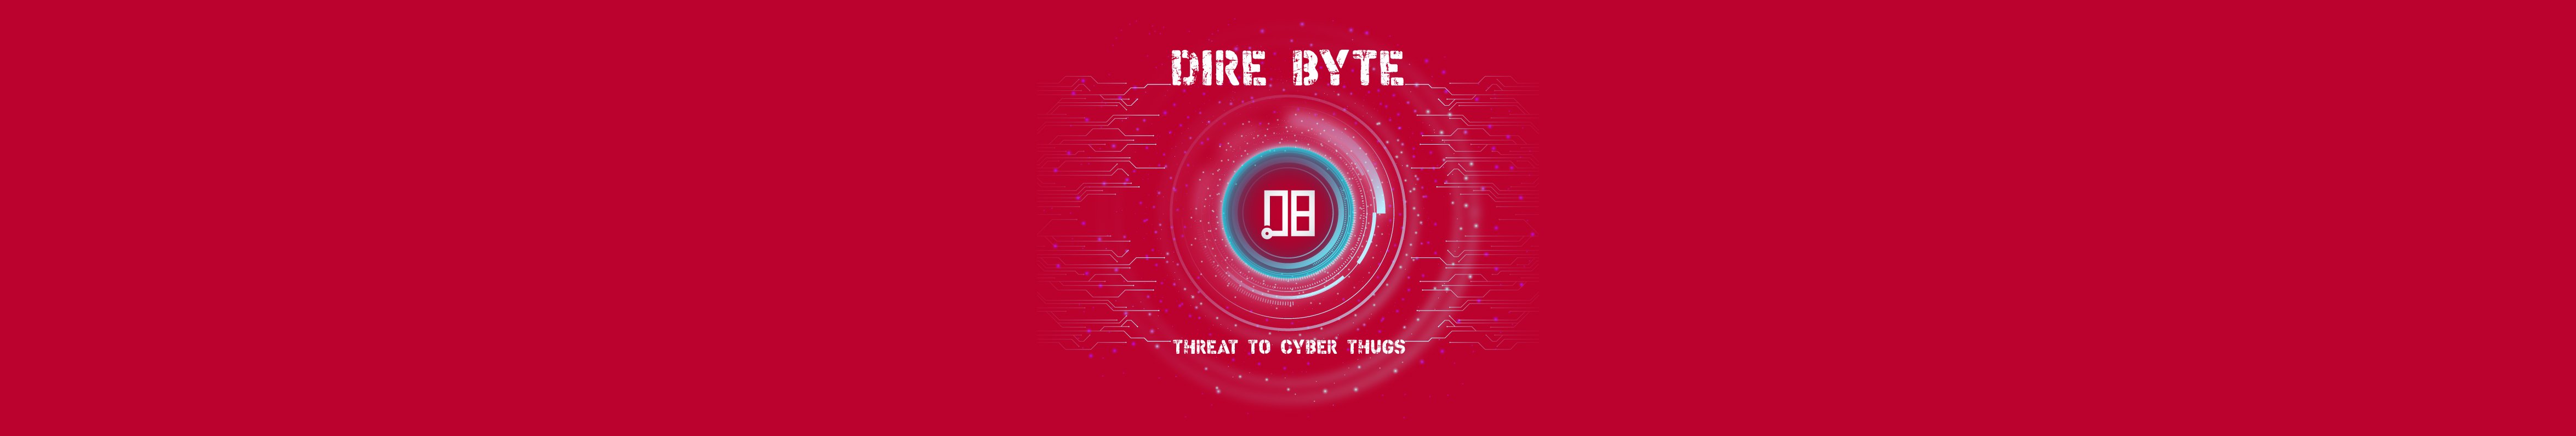 Dire Byte cover